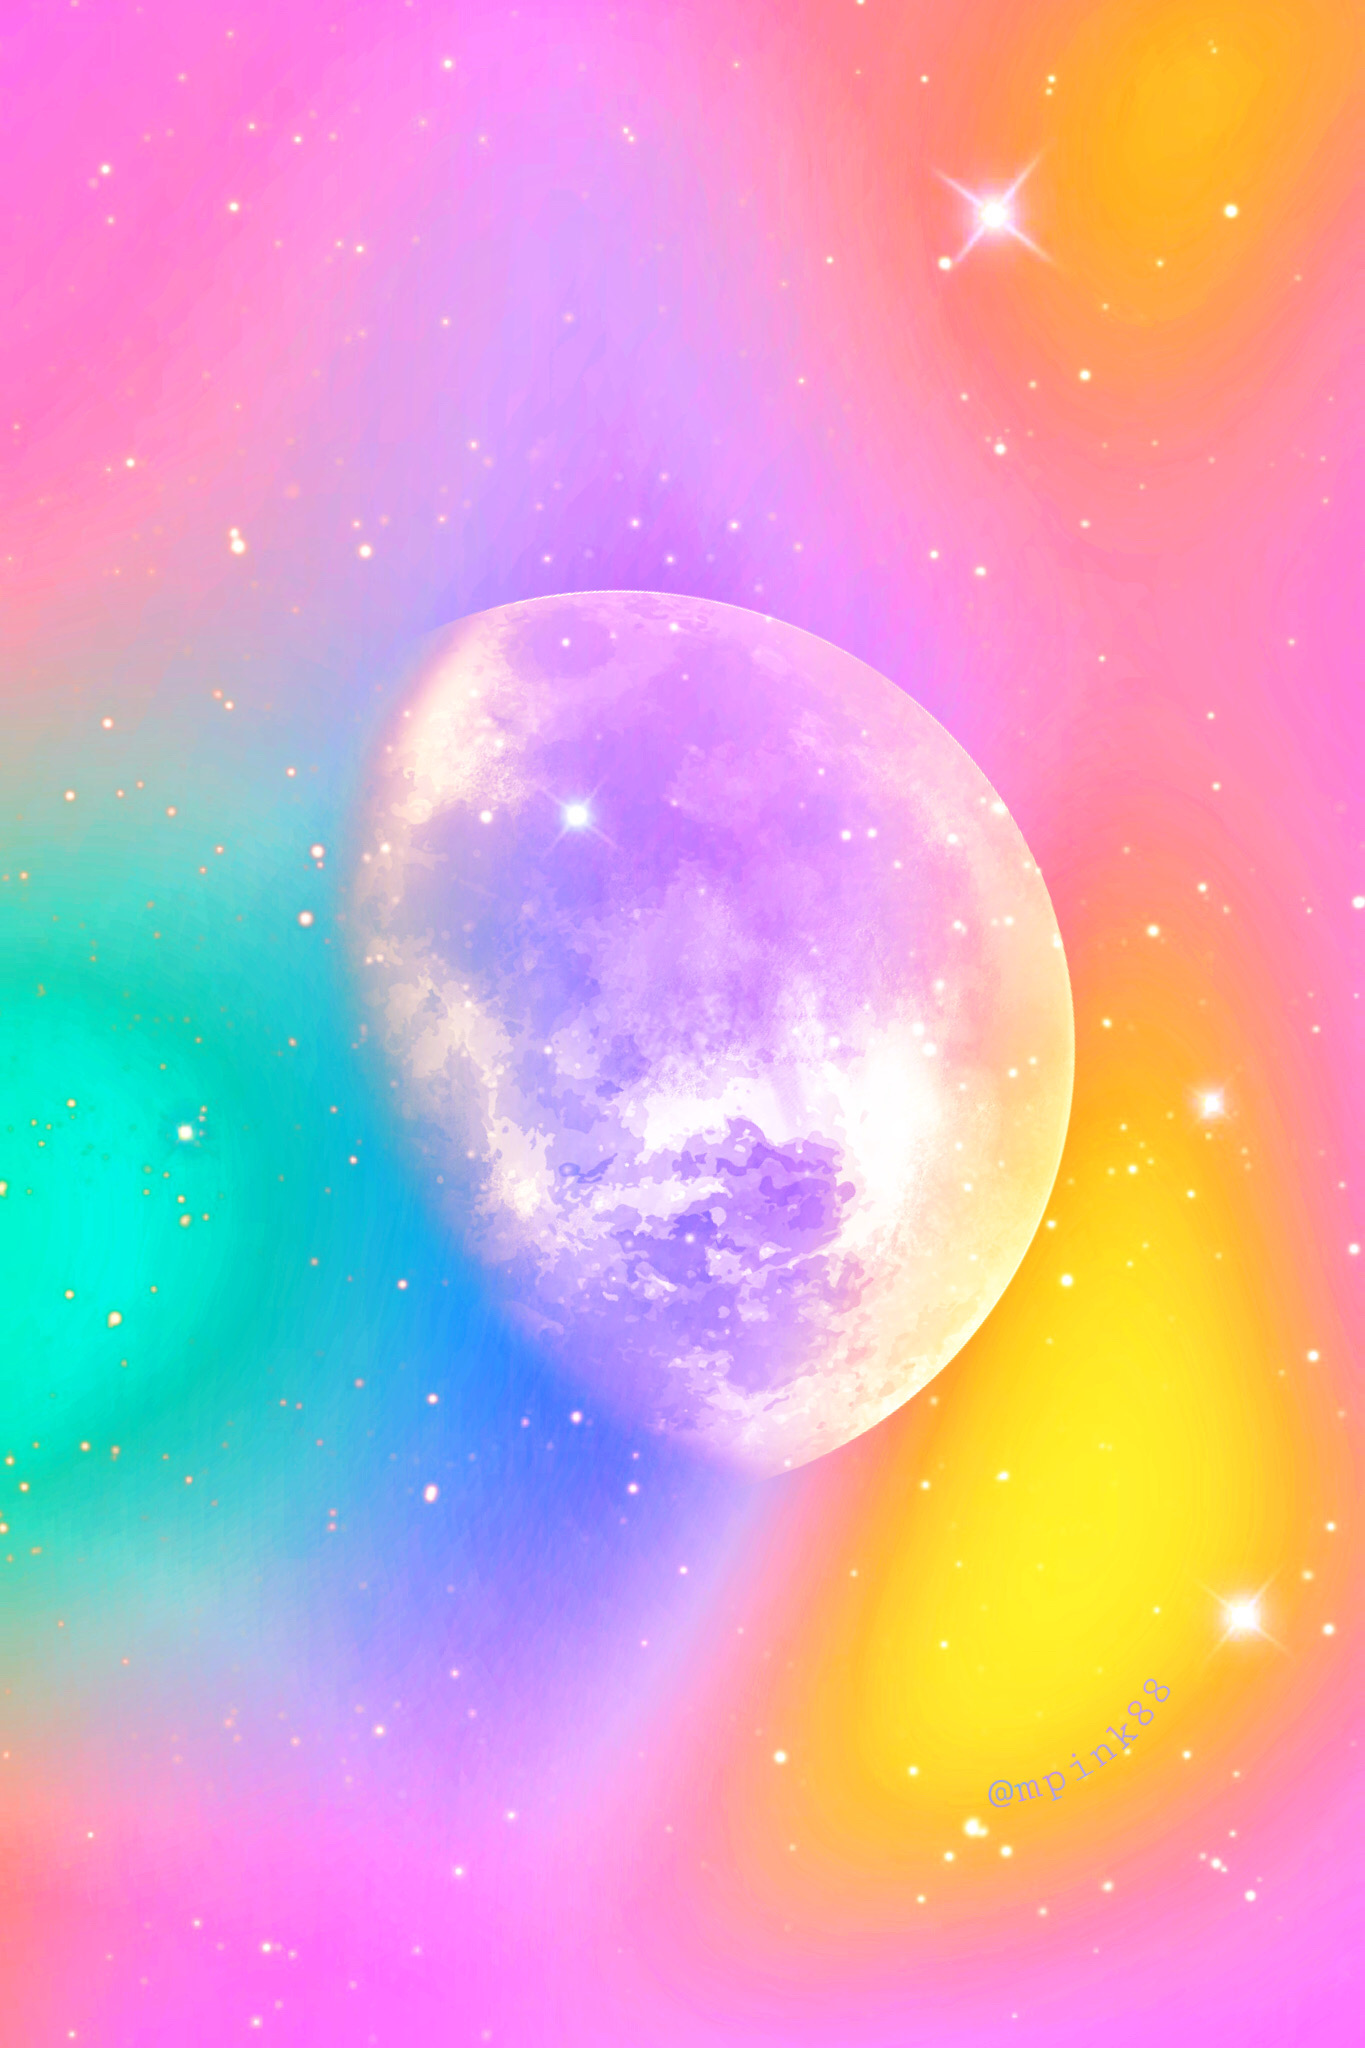 #freetoedit @mpink88 #glitter #sparkles #galaxy #sky #stars #moon #nature #landscape #space #pastel #colorful #cute #kawaii #gradient #aesthetic #pink #cos